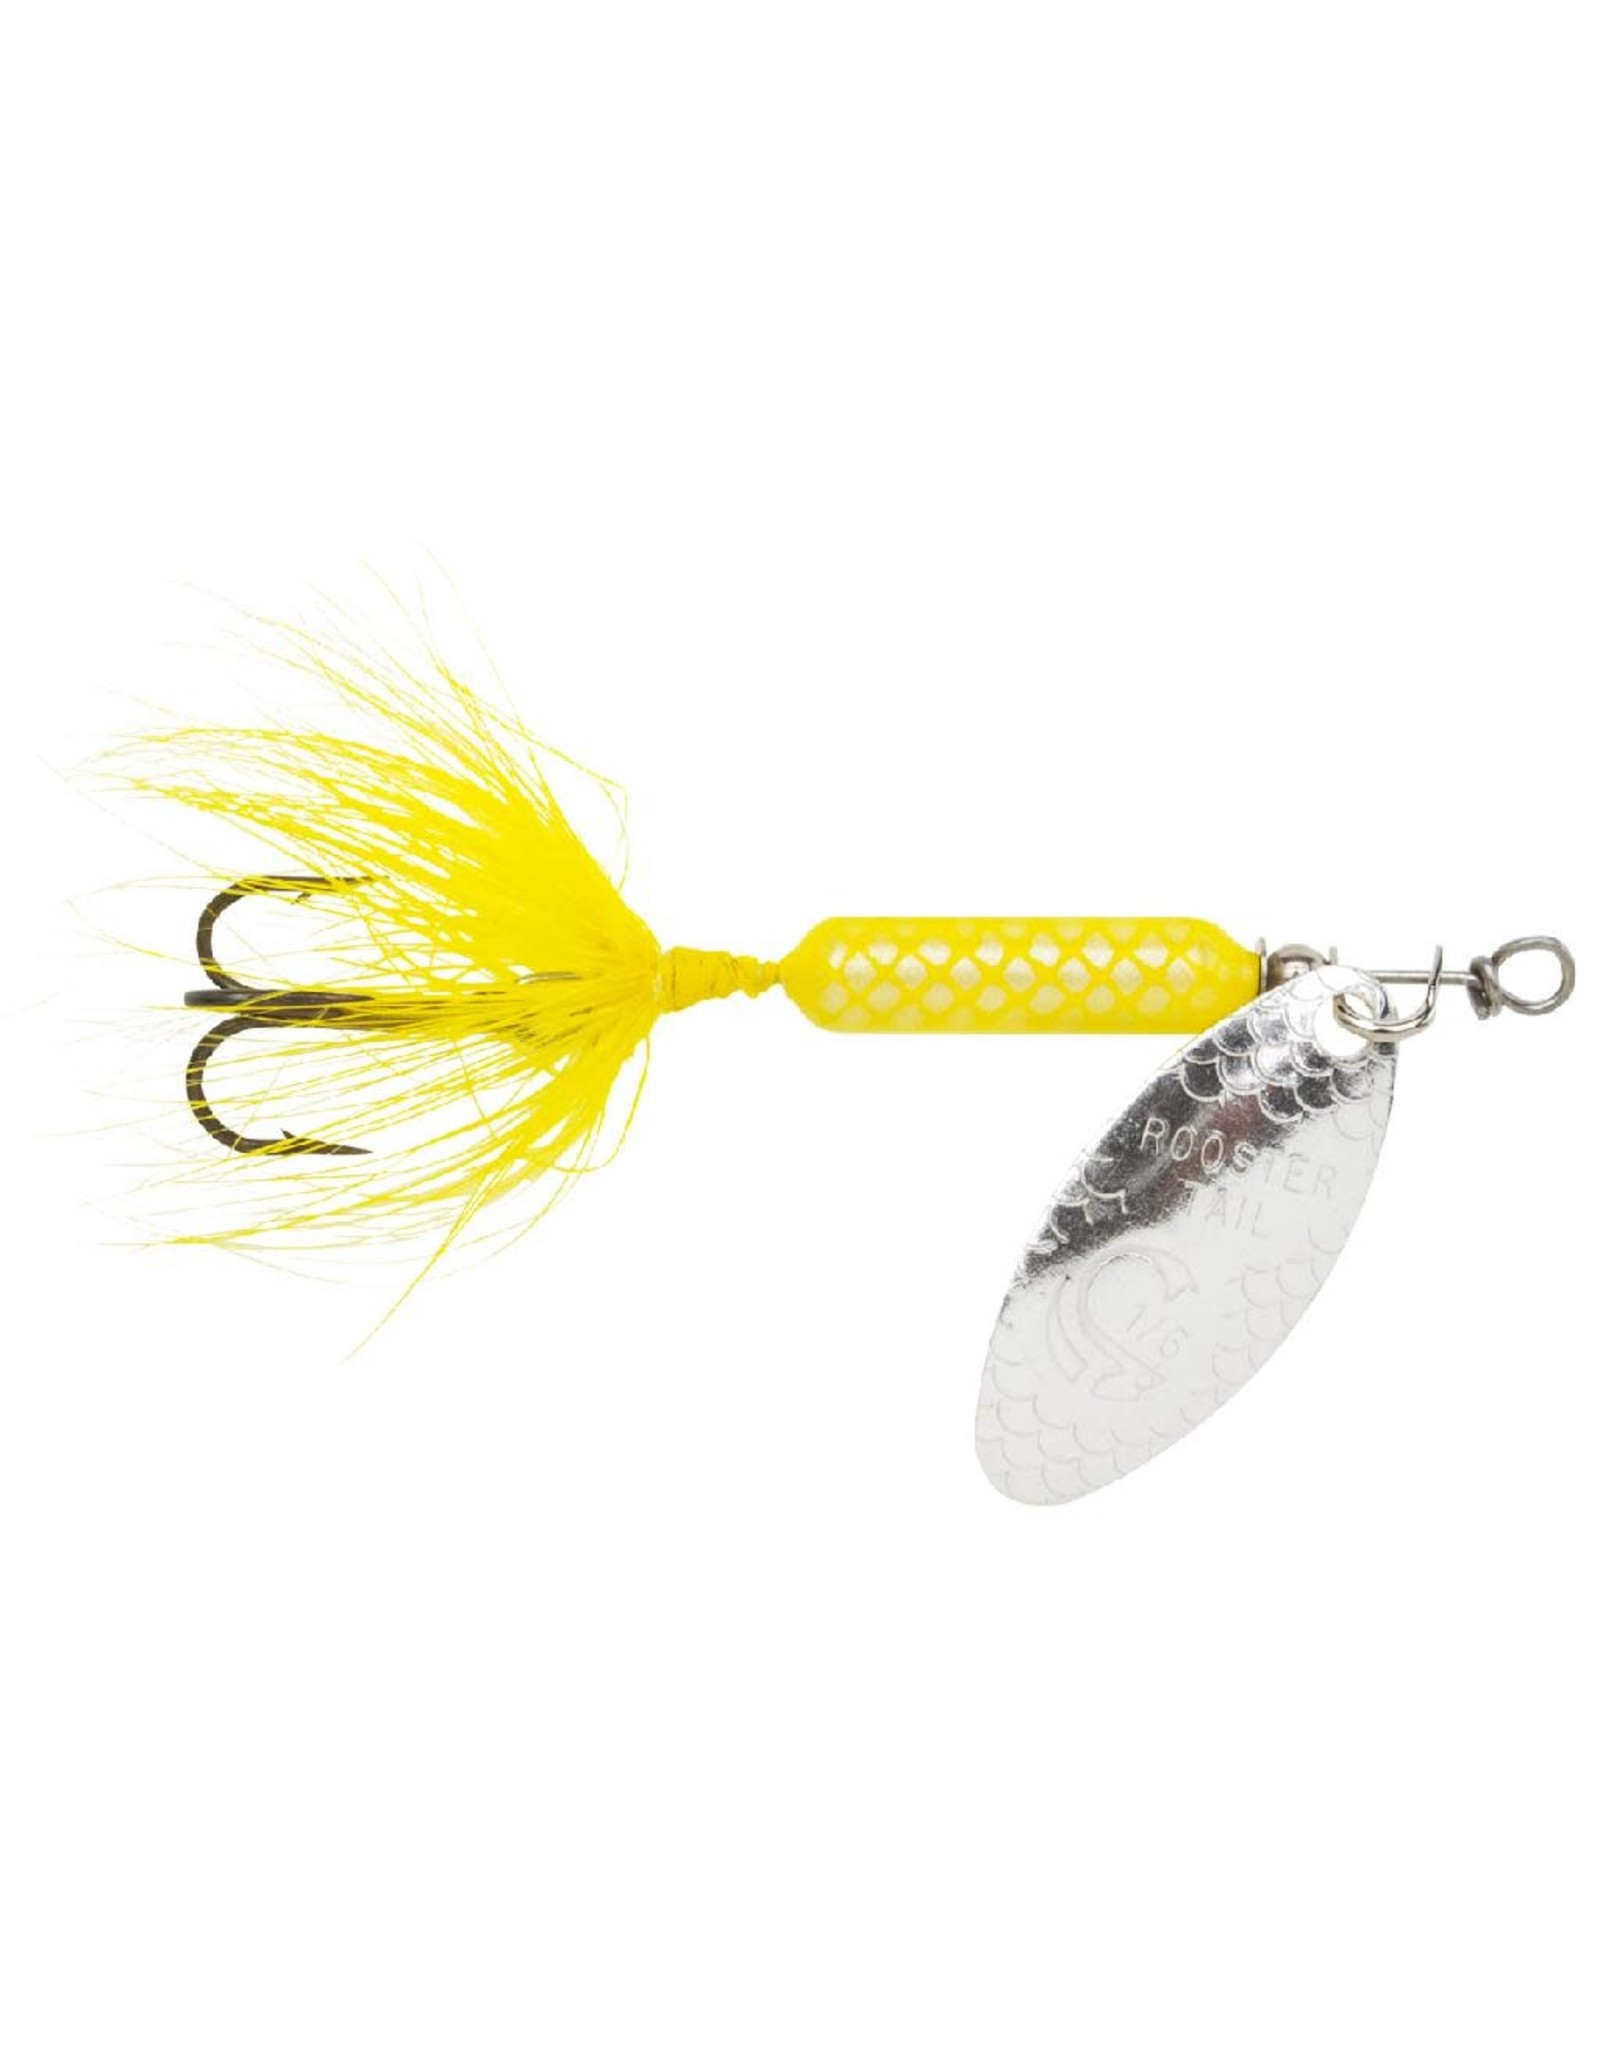 Worden's Rooster Tail 2-1/2" 1/6 Oz. - Yellow